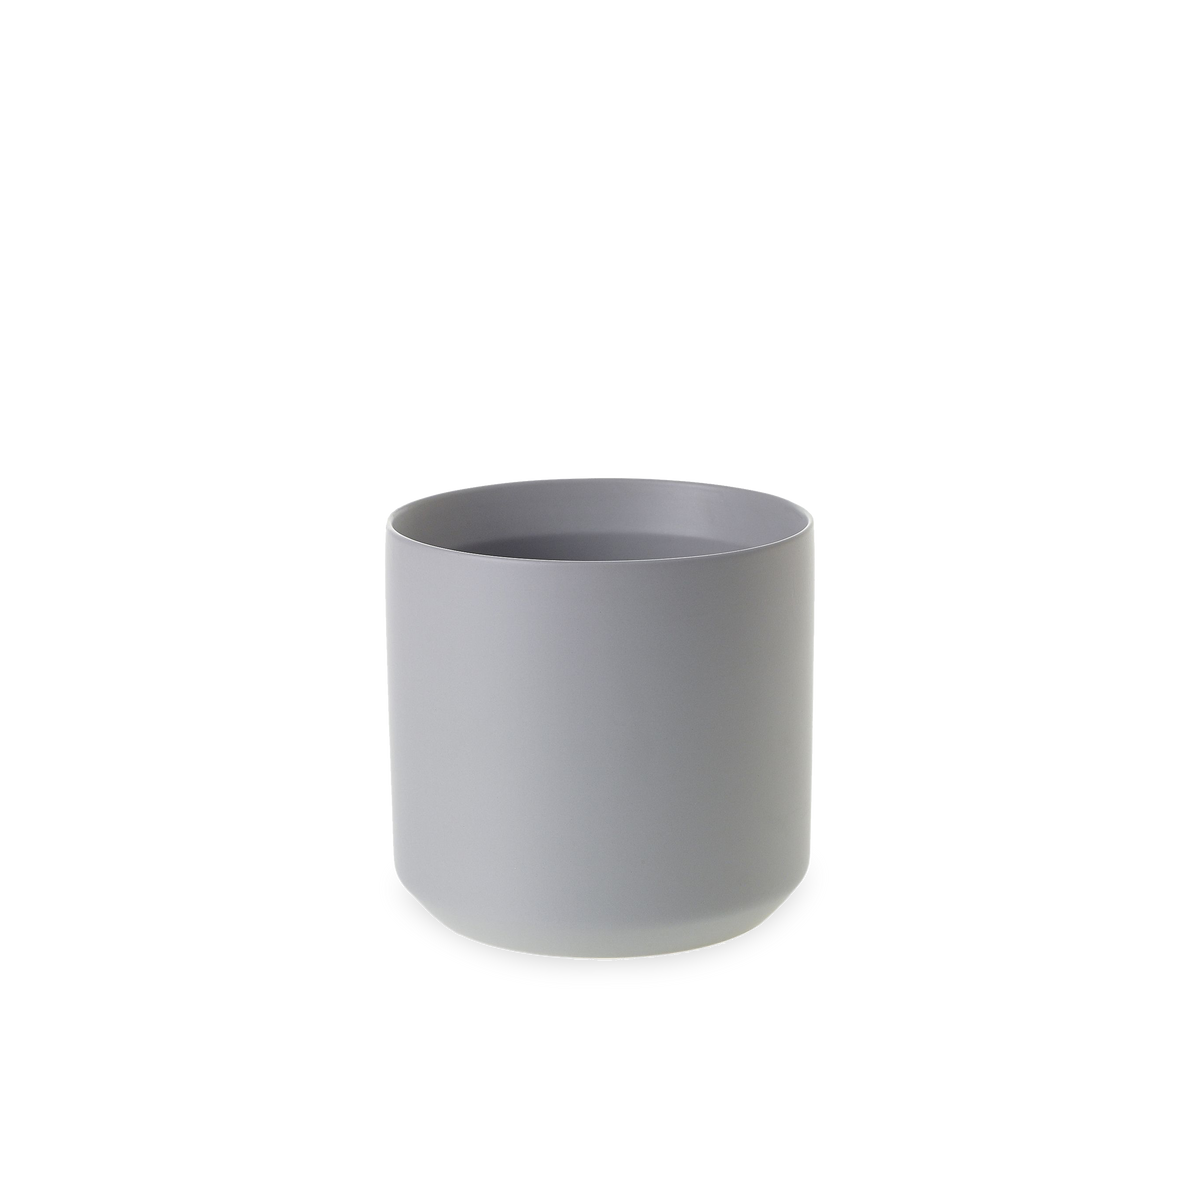 The Neo Pot features simple lines and neutral yet trendy colours made from 100% ceramic.